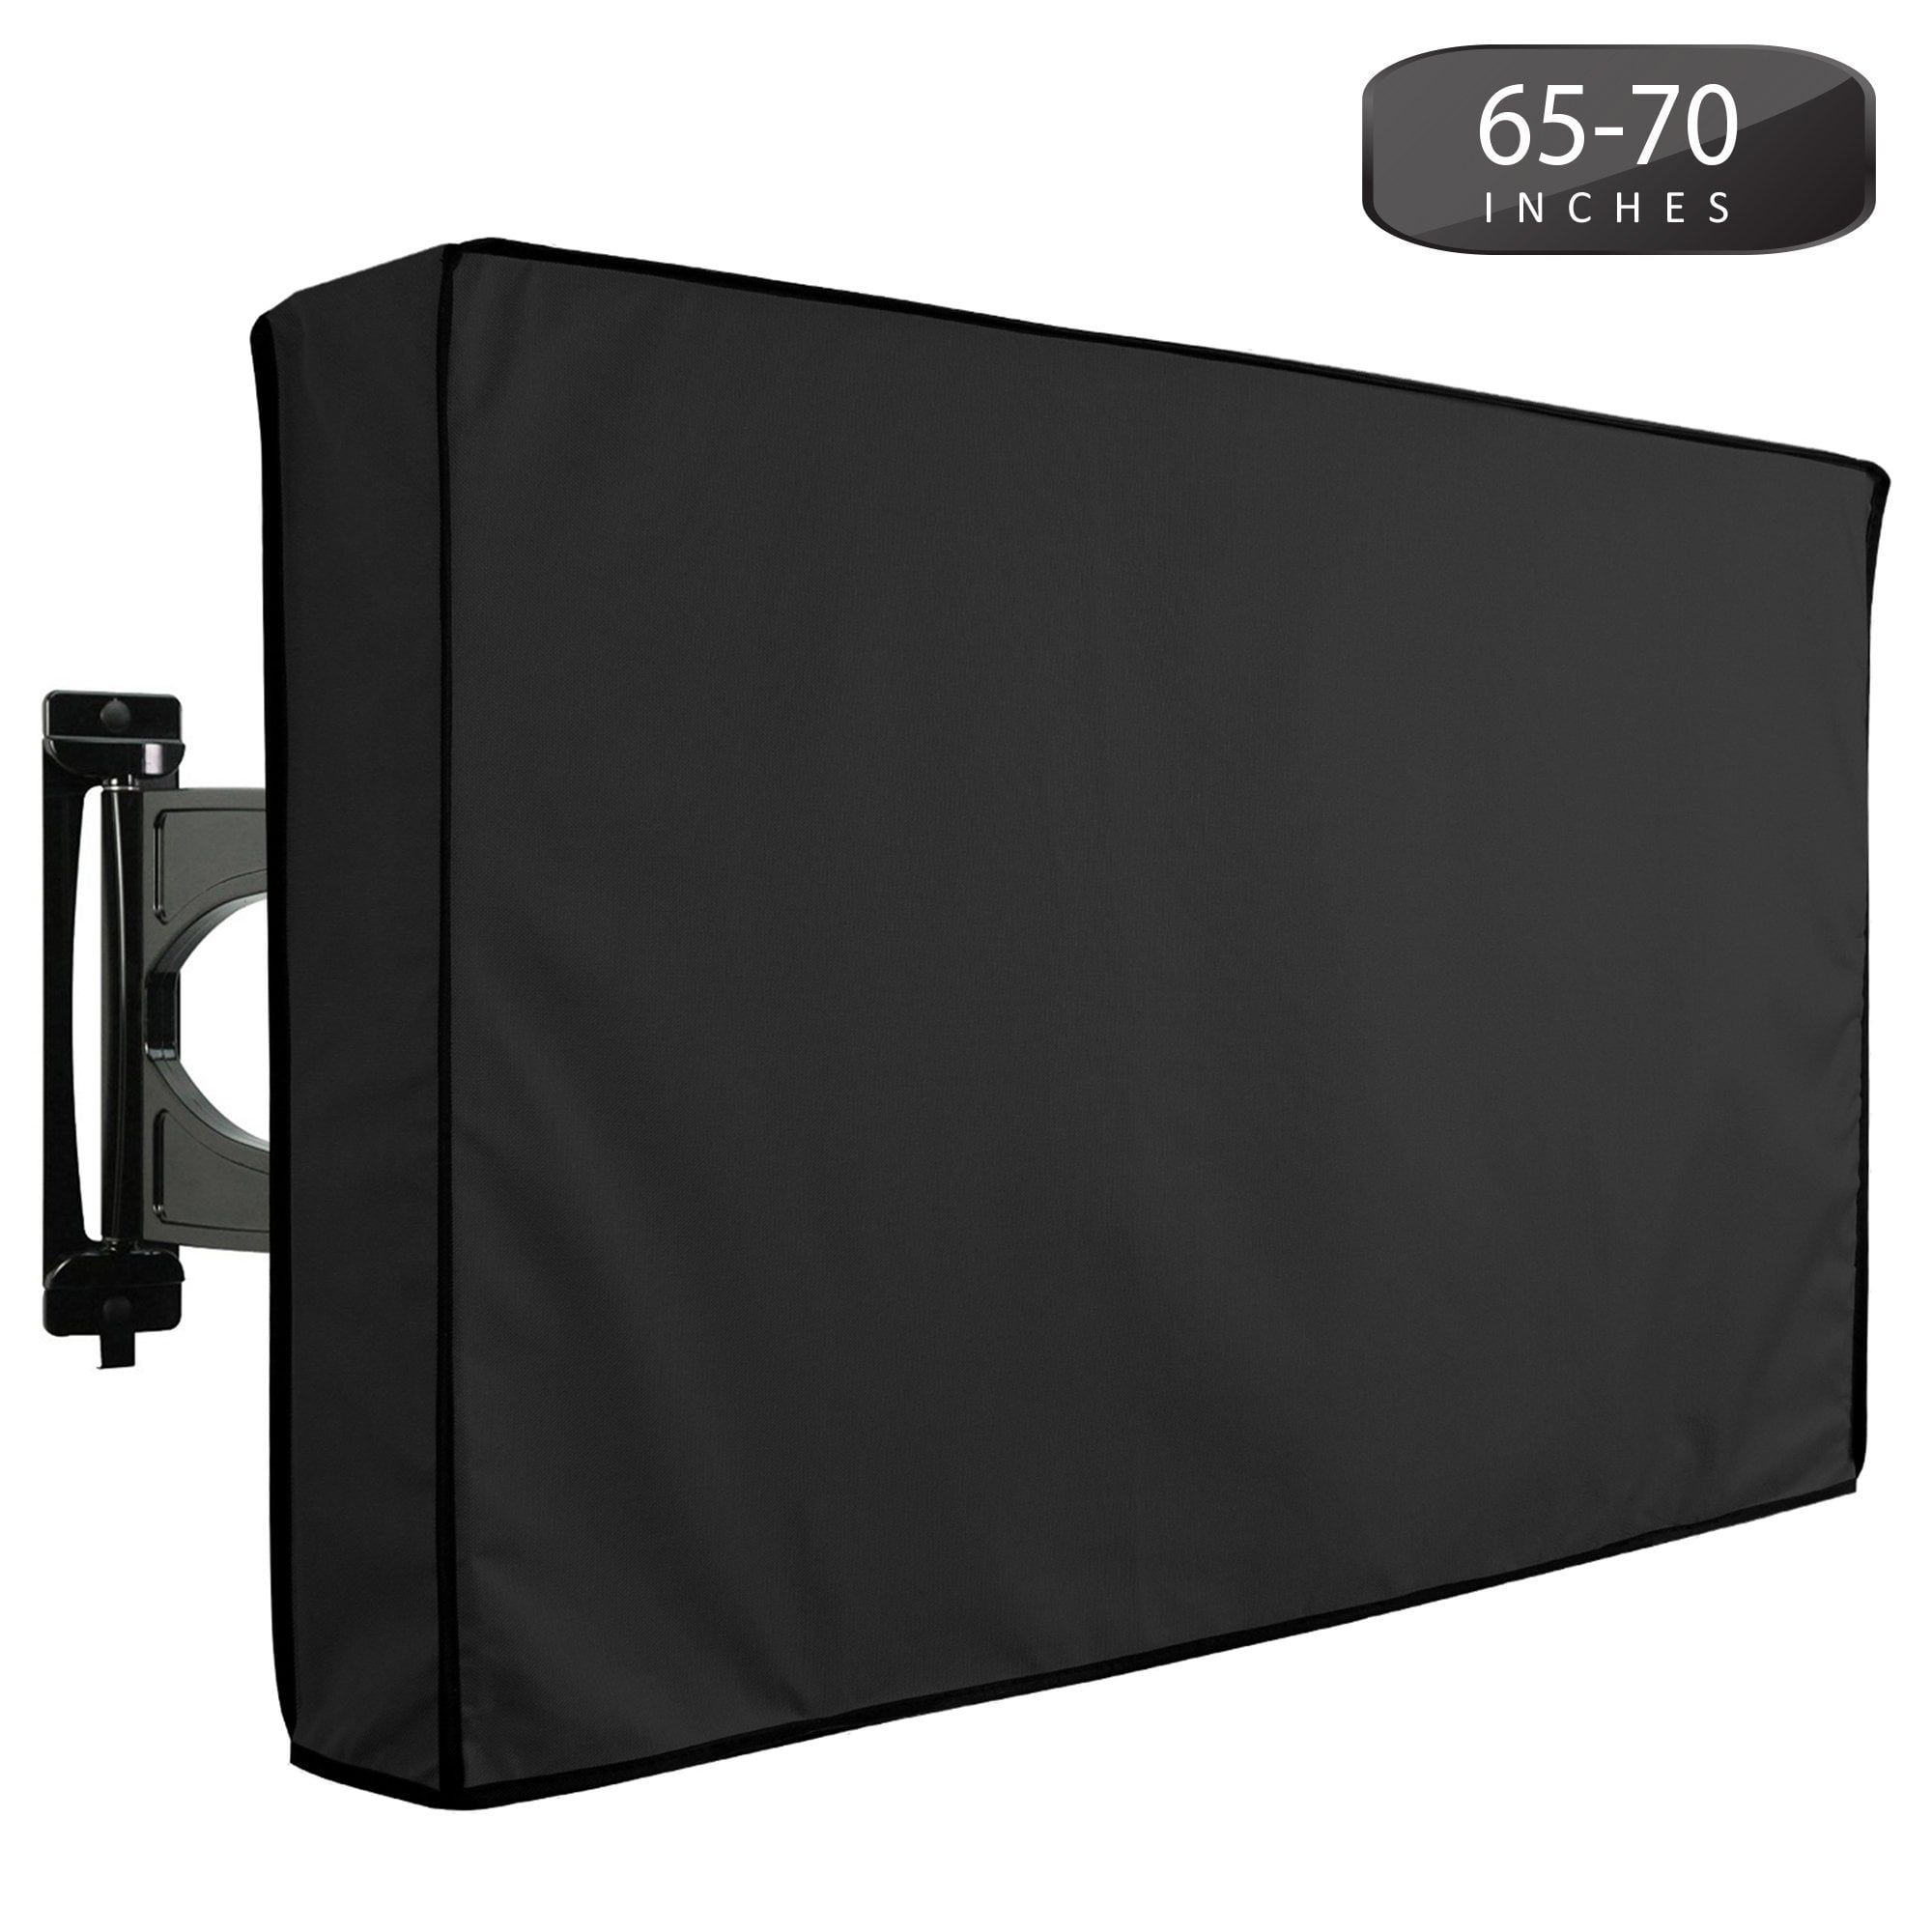 Compatible with Standard Mounts and Stands. Outdoor TV Cover 58-60 Black Weatherproof Universal Protector for LCD Plasma Television Screens LED Built in Bottom Cover and Remote Storage